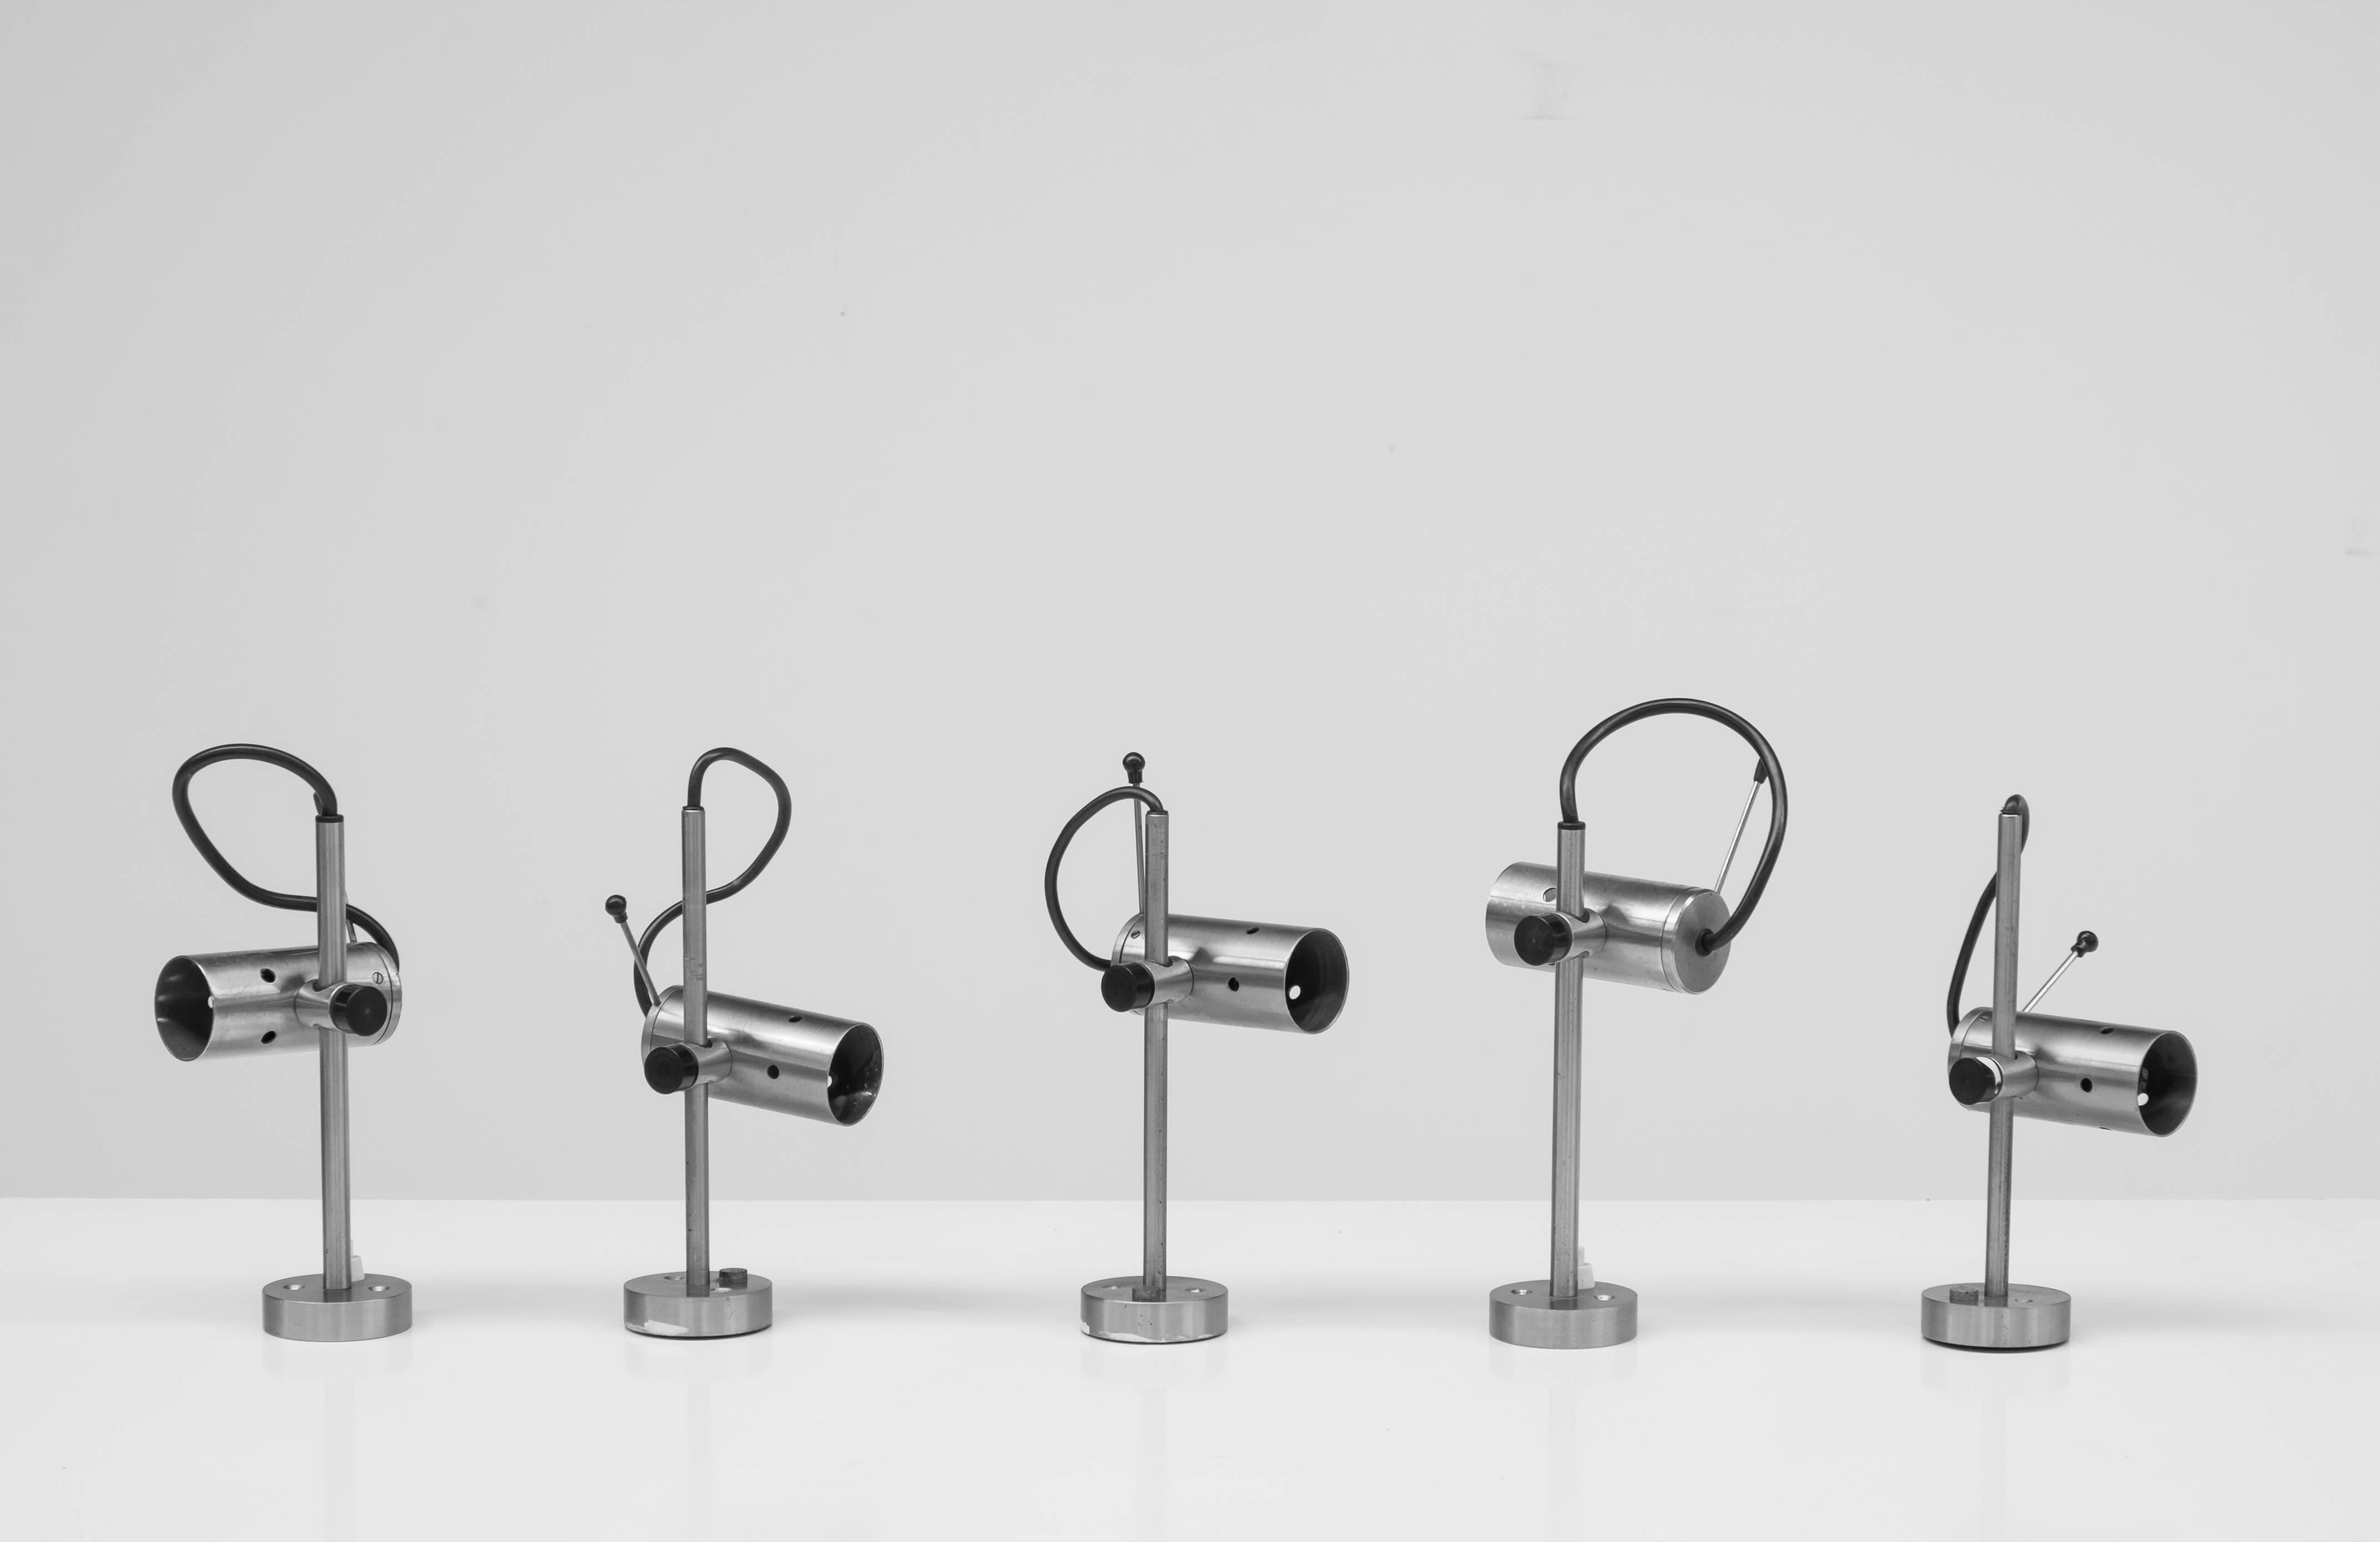 Five appliques by Italian designer Tito Agnoli for O-luce, 1954.
Stainless steel axis with adjustable fitting containing a bajonet socket. 
Two appliques with switch, three without. 

These are no longer published today.